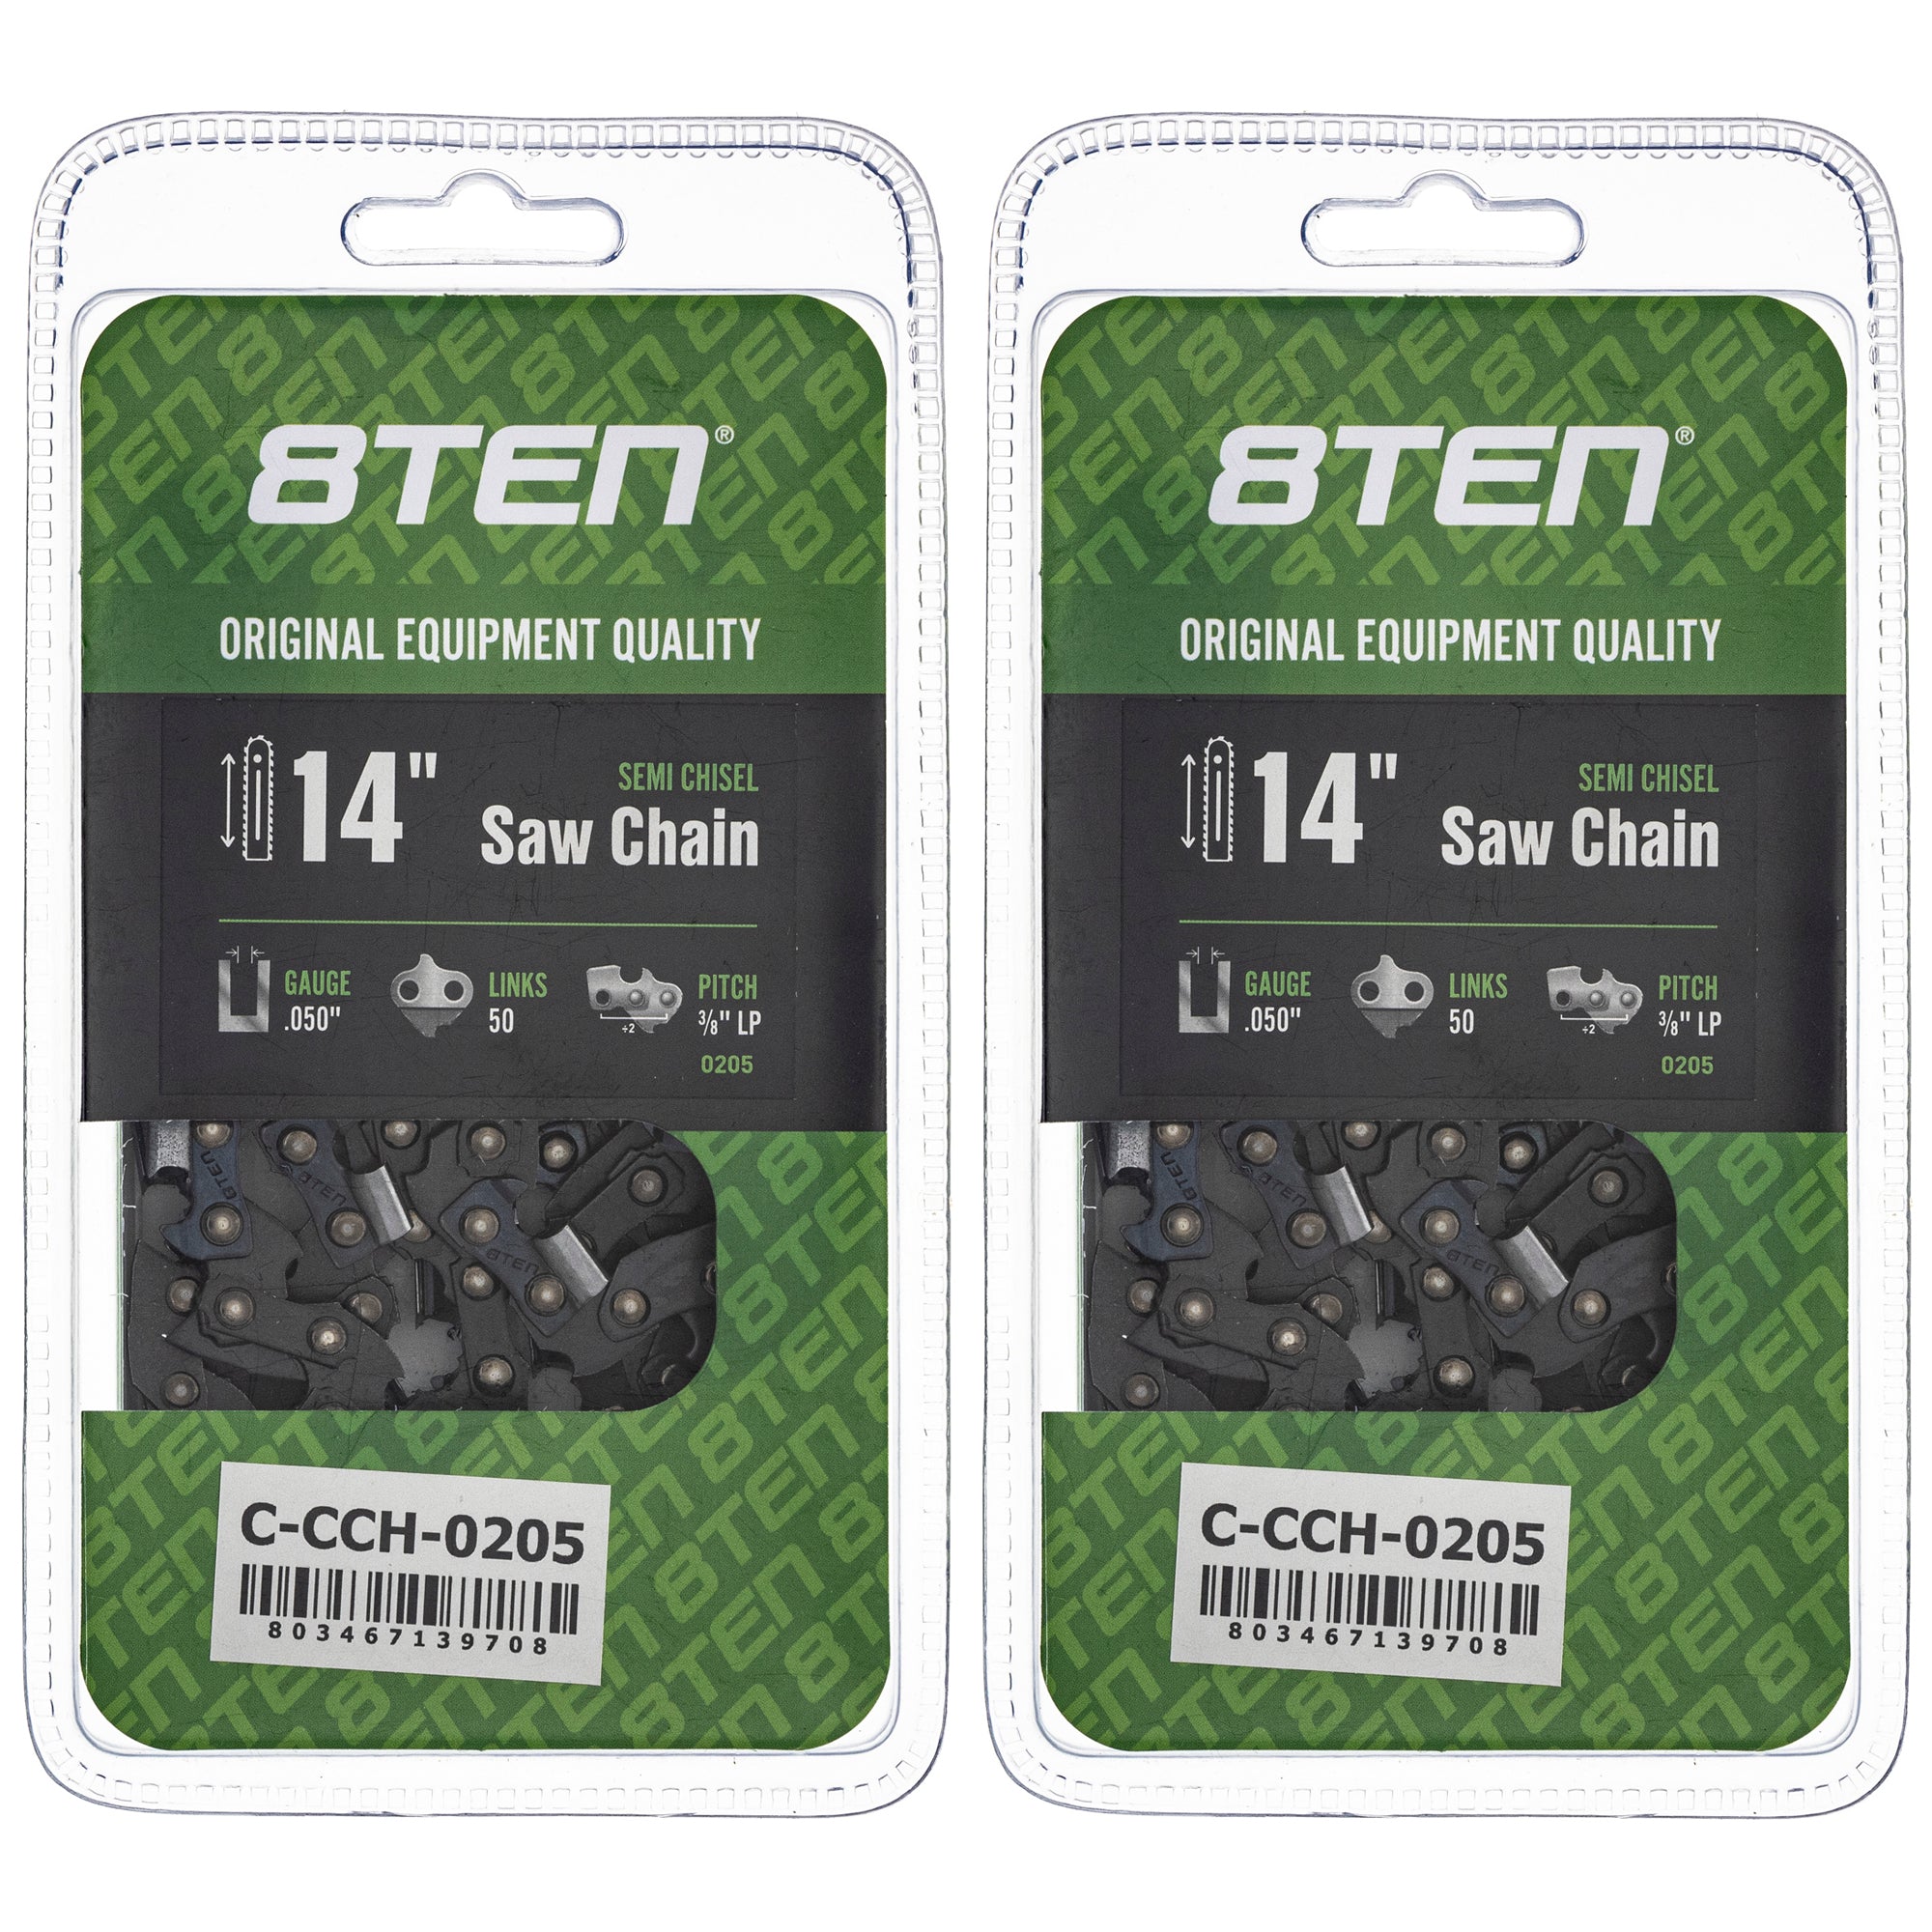 Chainsaw Chain 14 Inch .050 3/8 LP 50DL 2-Pack for zOTHER Oregon OLE MSE MS Mac 8TEN 810-CCC2427H